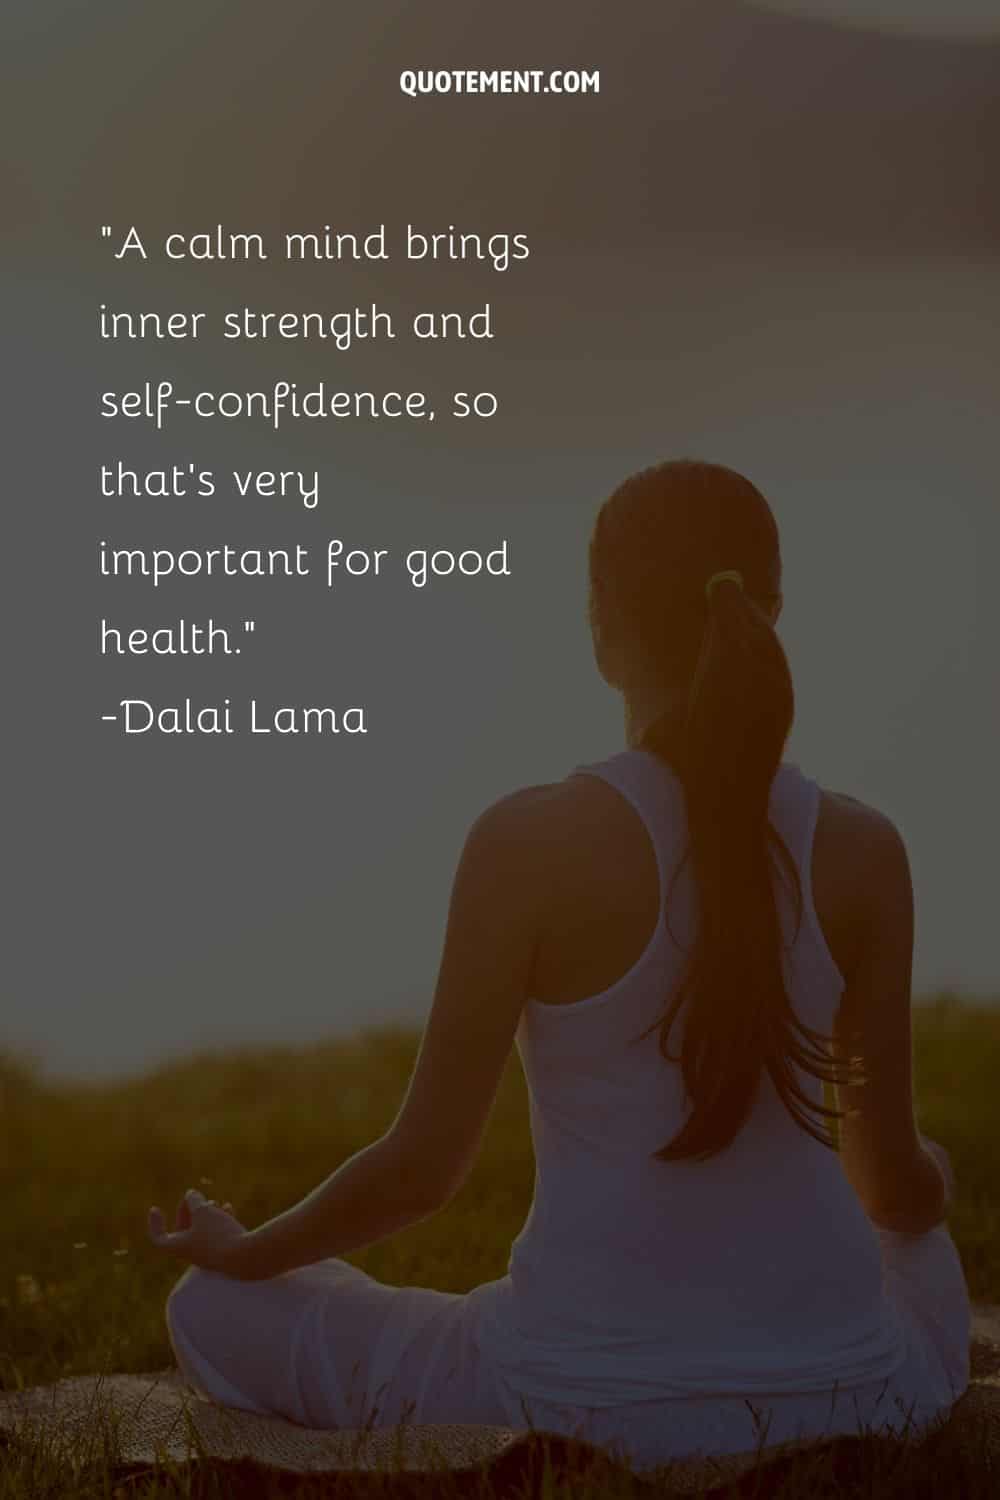 A calm mind brings inner strength and self-confidence, so that’s very important for good health